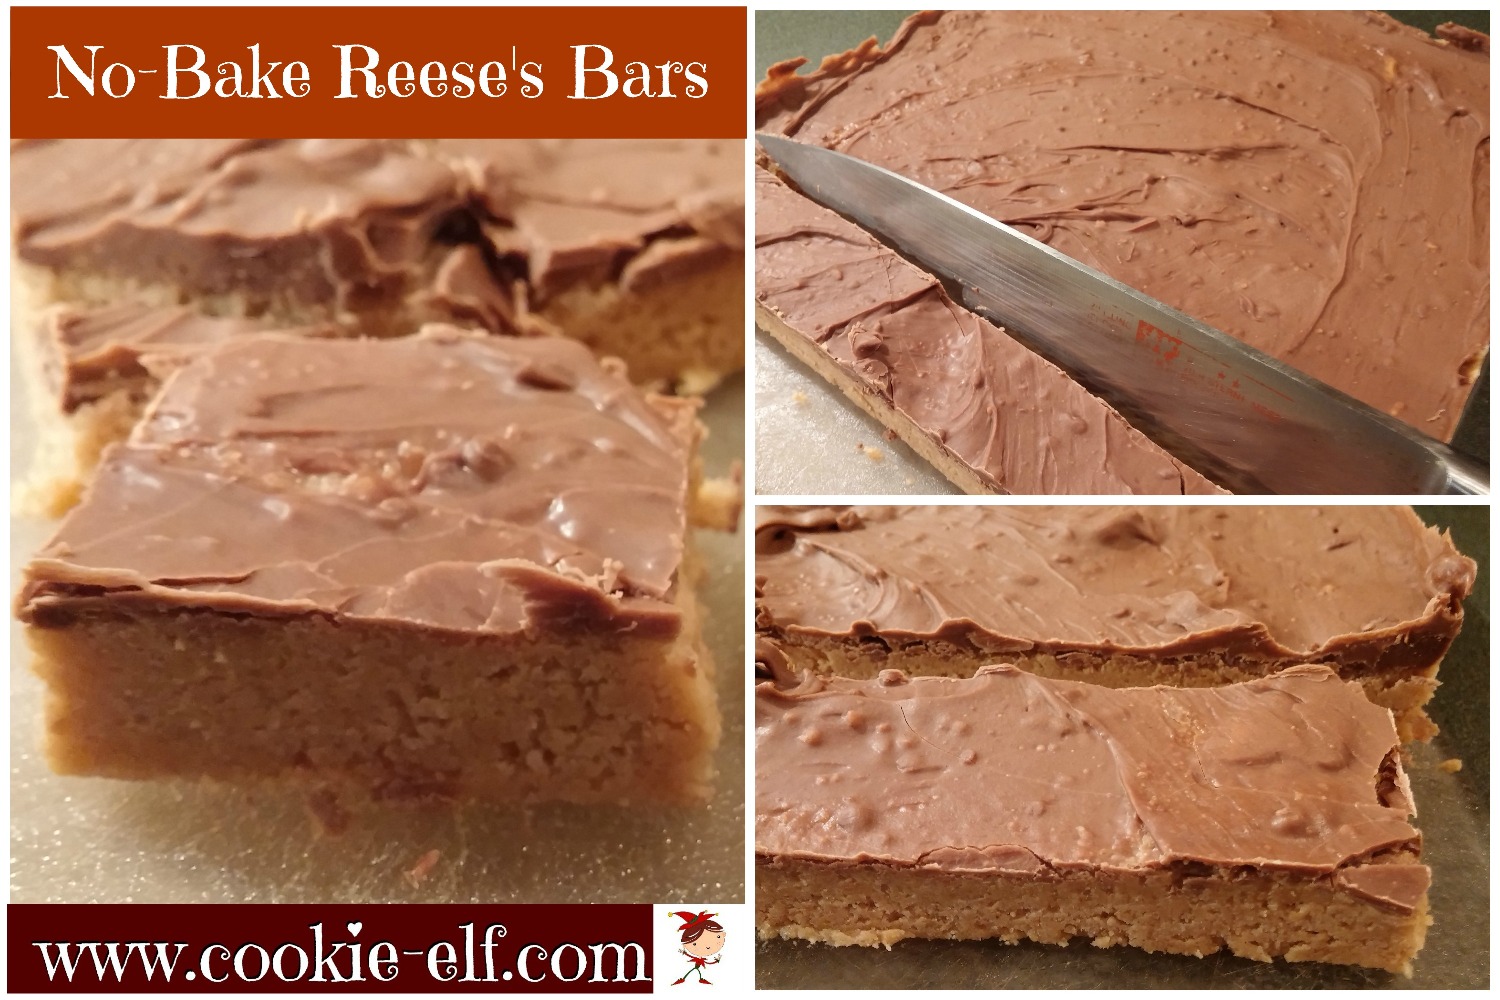 No-Bake Reese's Bars from The Cookie Elf